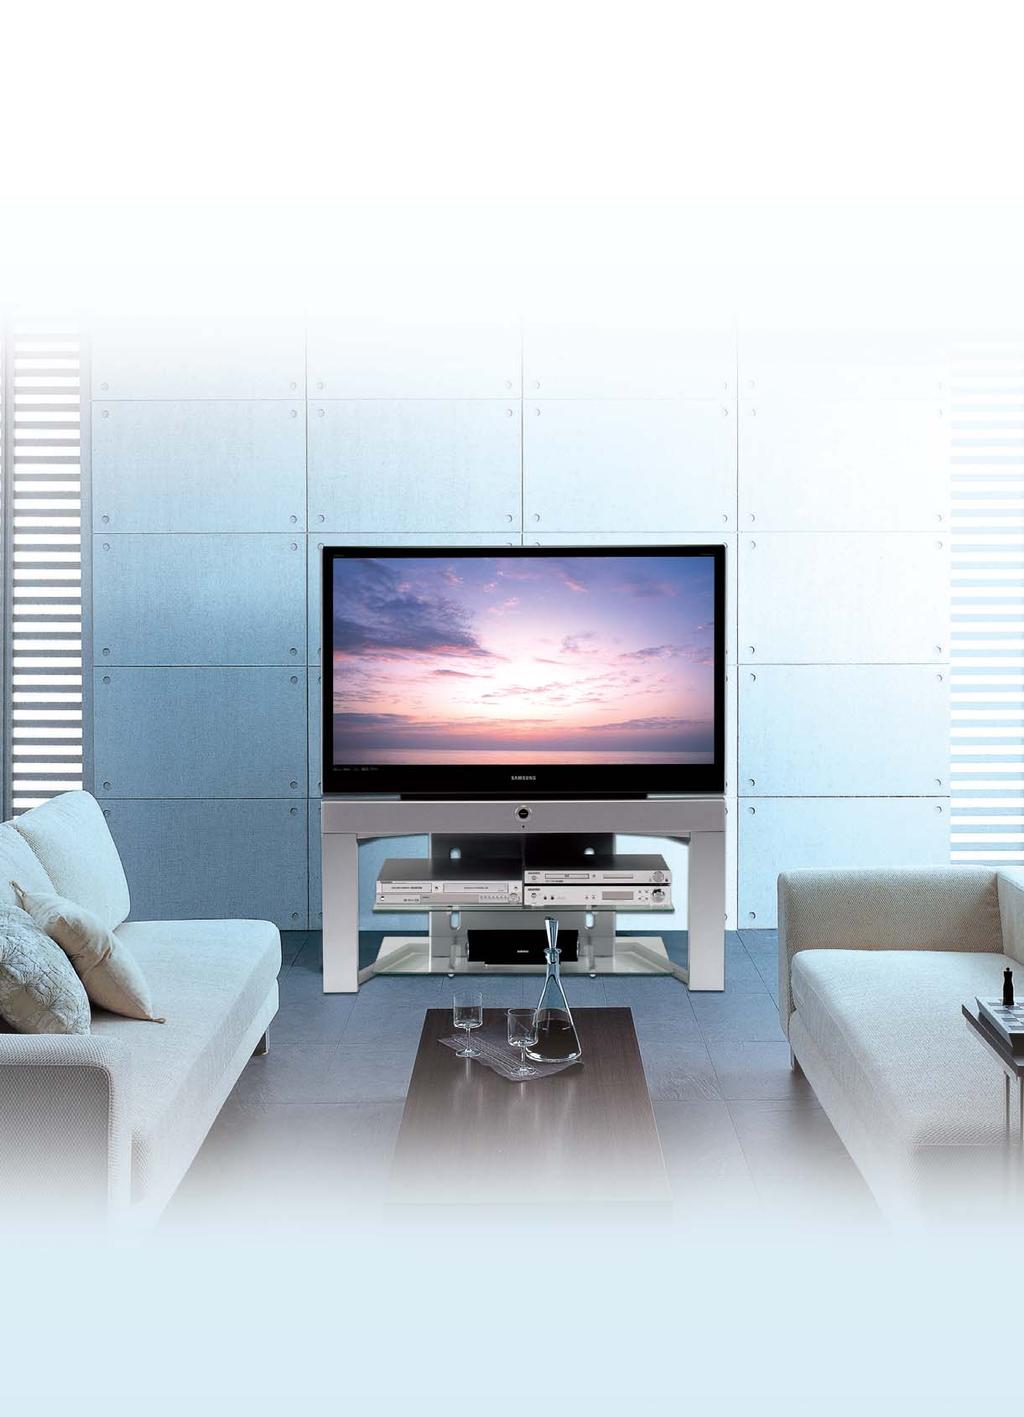 High Definition Televisions DLP TV by Samsung New Floating Screen compact, lightweight design fits where others won t Digital Cable Ready (DCR) with CableCARD Built-in Analog/Digital Tuner